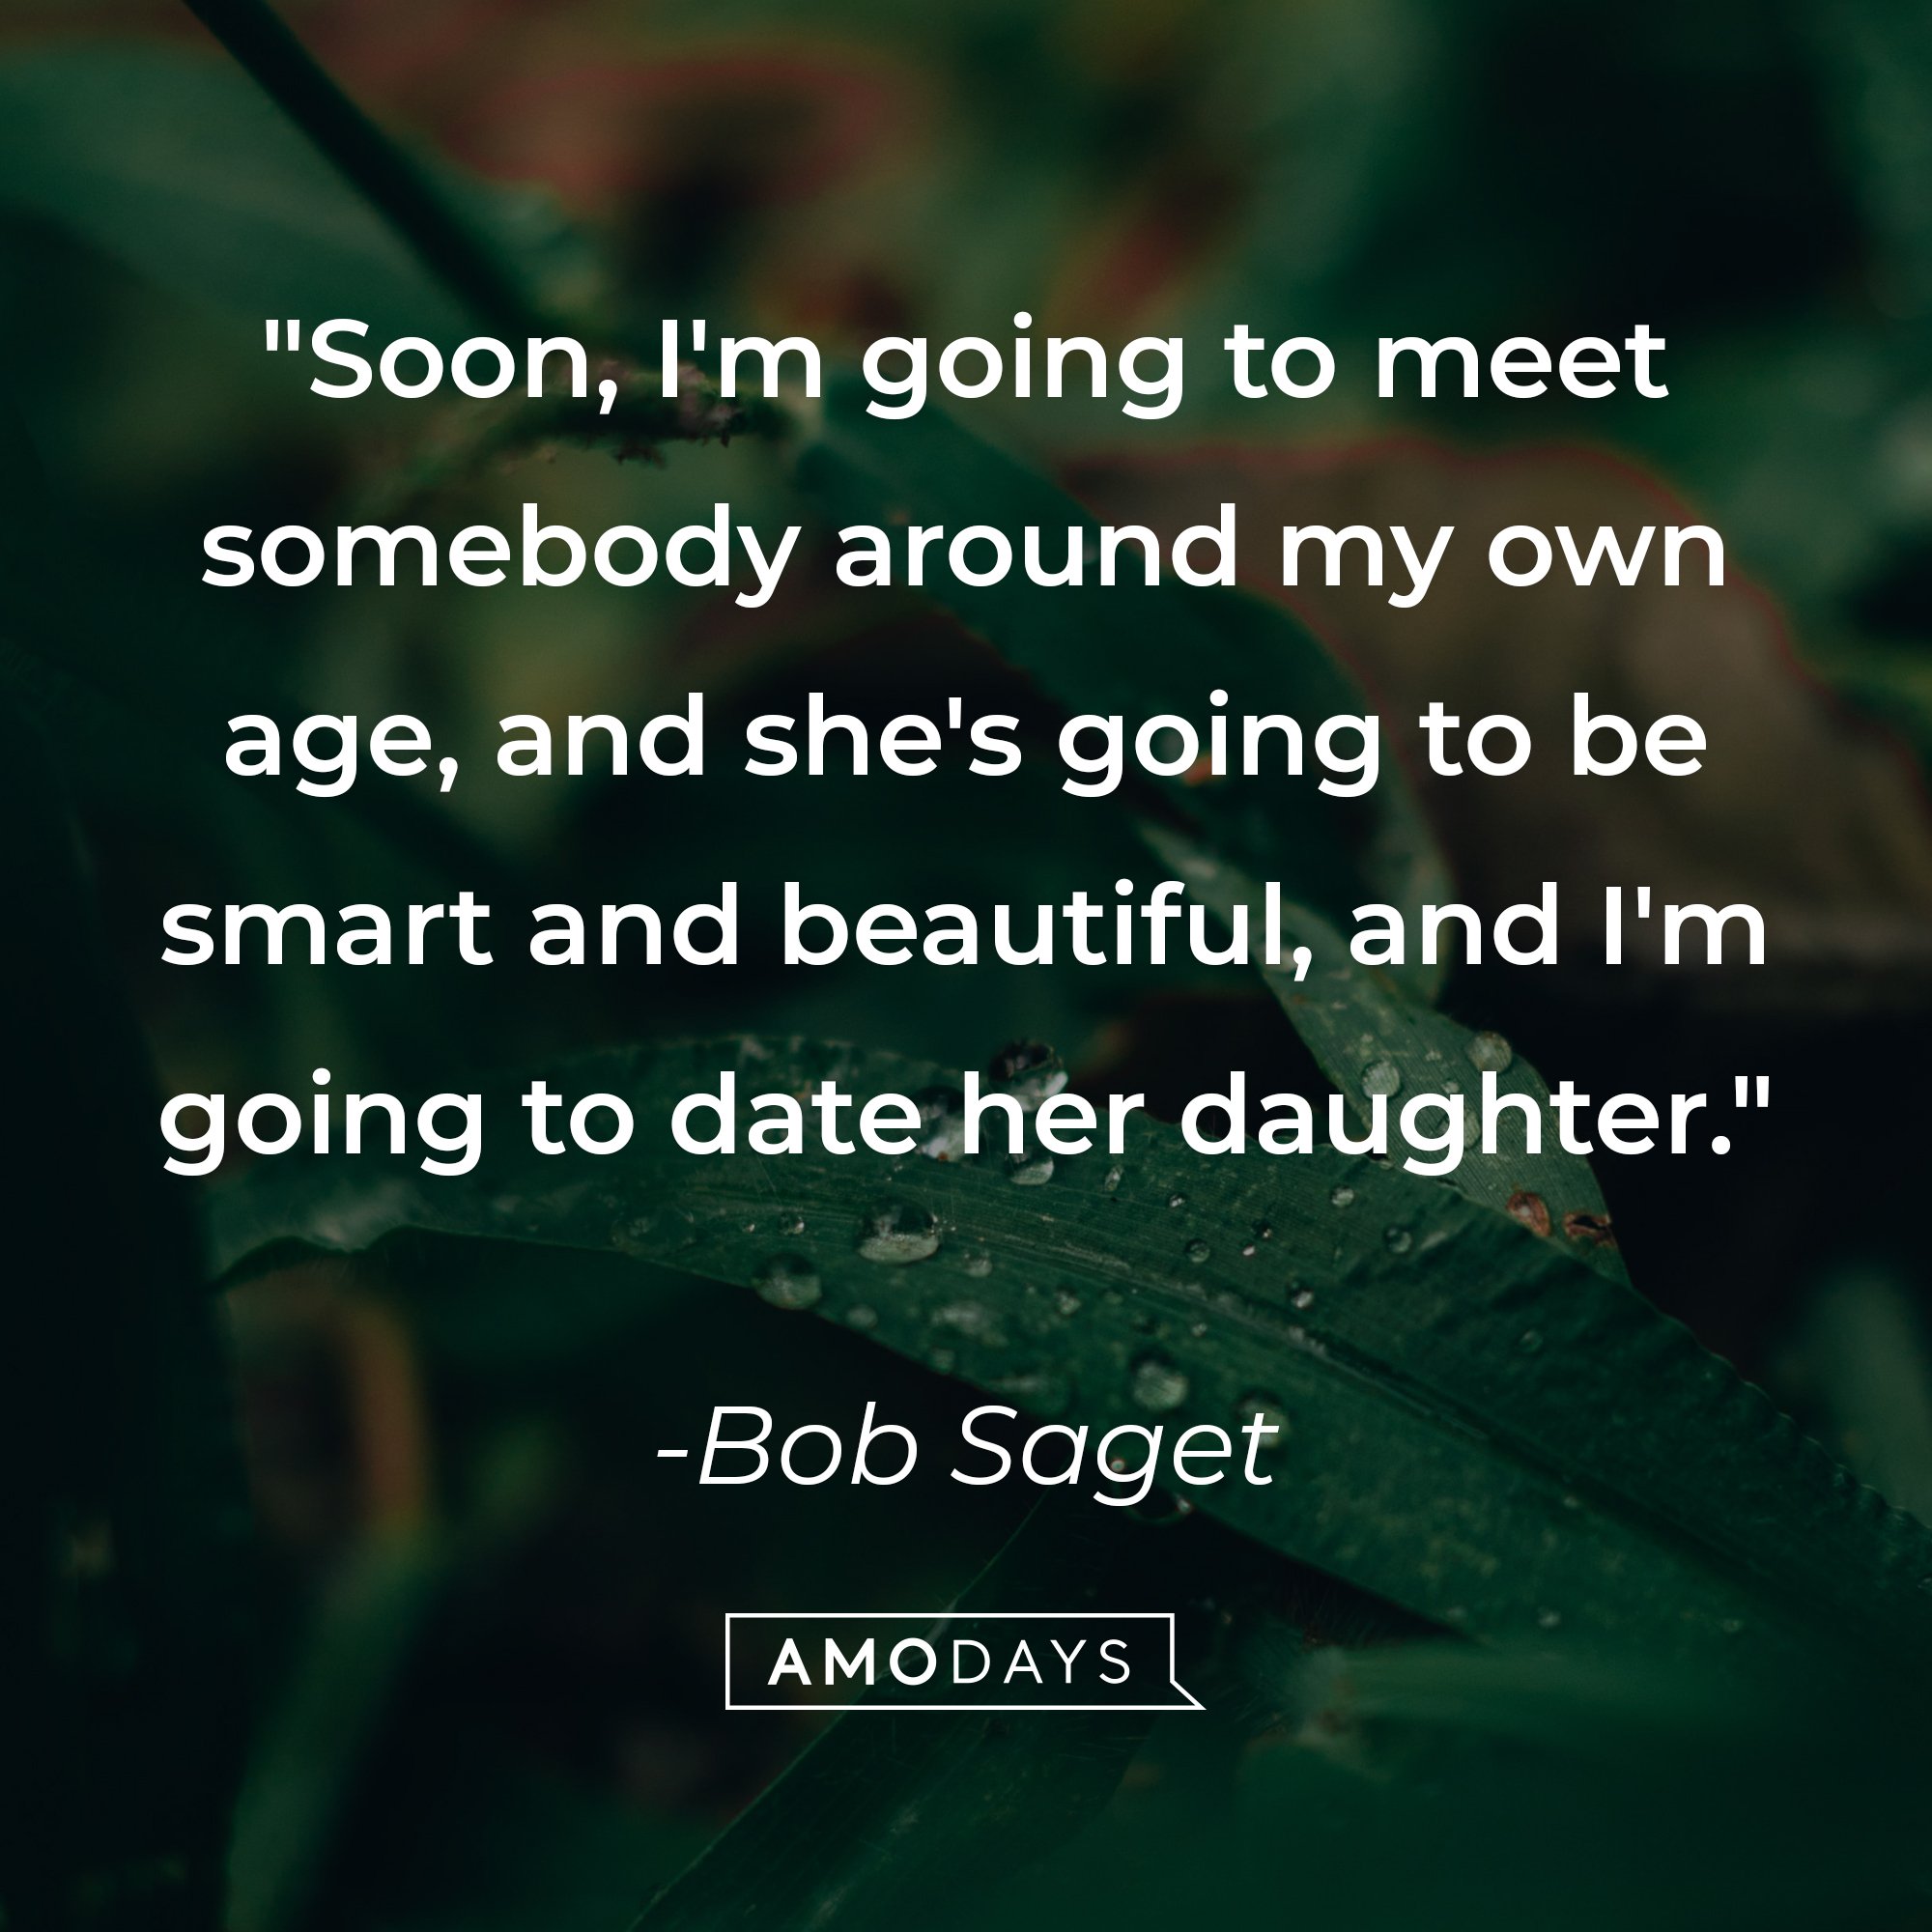  Bob Saget’s quote: "Soon, I'm going to meet somebody around my own age, and she's going to be smart and beautiful, and I'm going to date her daughter." | Image: AmoDays